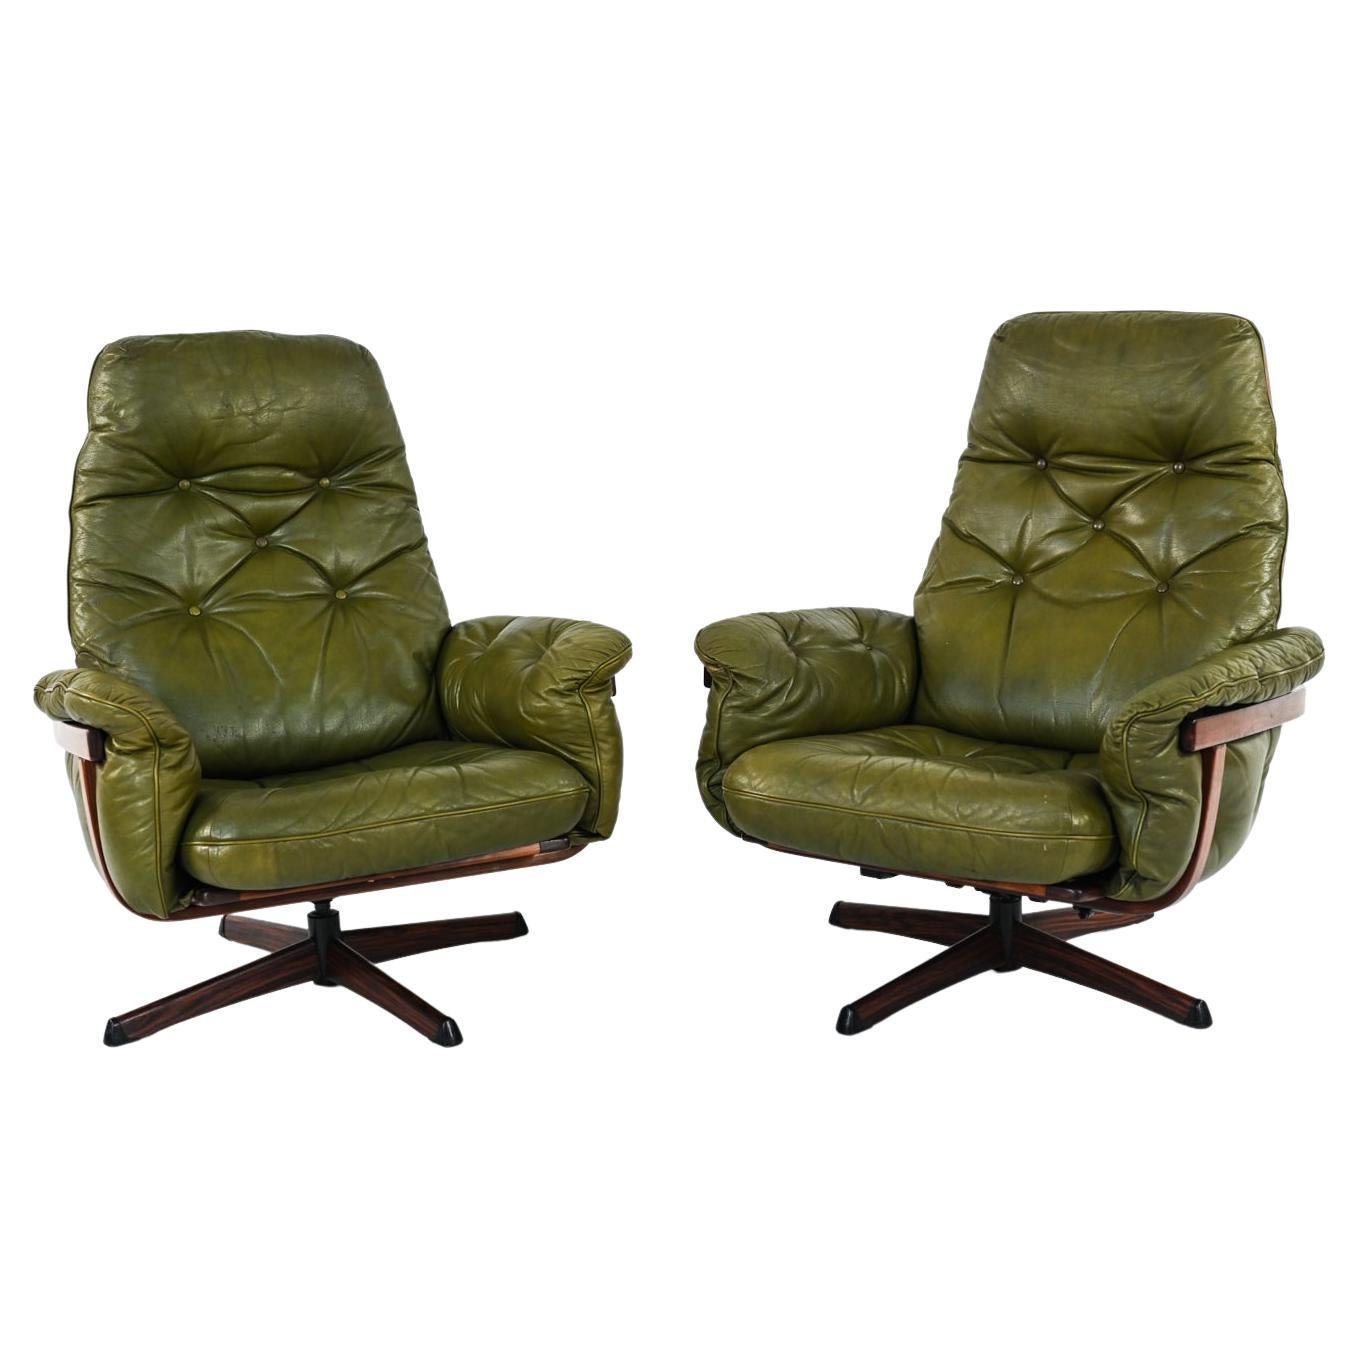 Pair of Göte Mobler Swedish Mid-Century Leather Lounge Chairs, 1960s